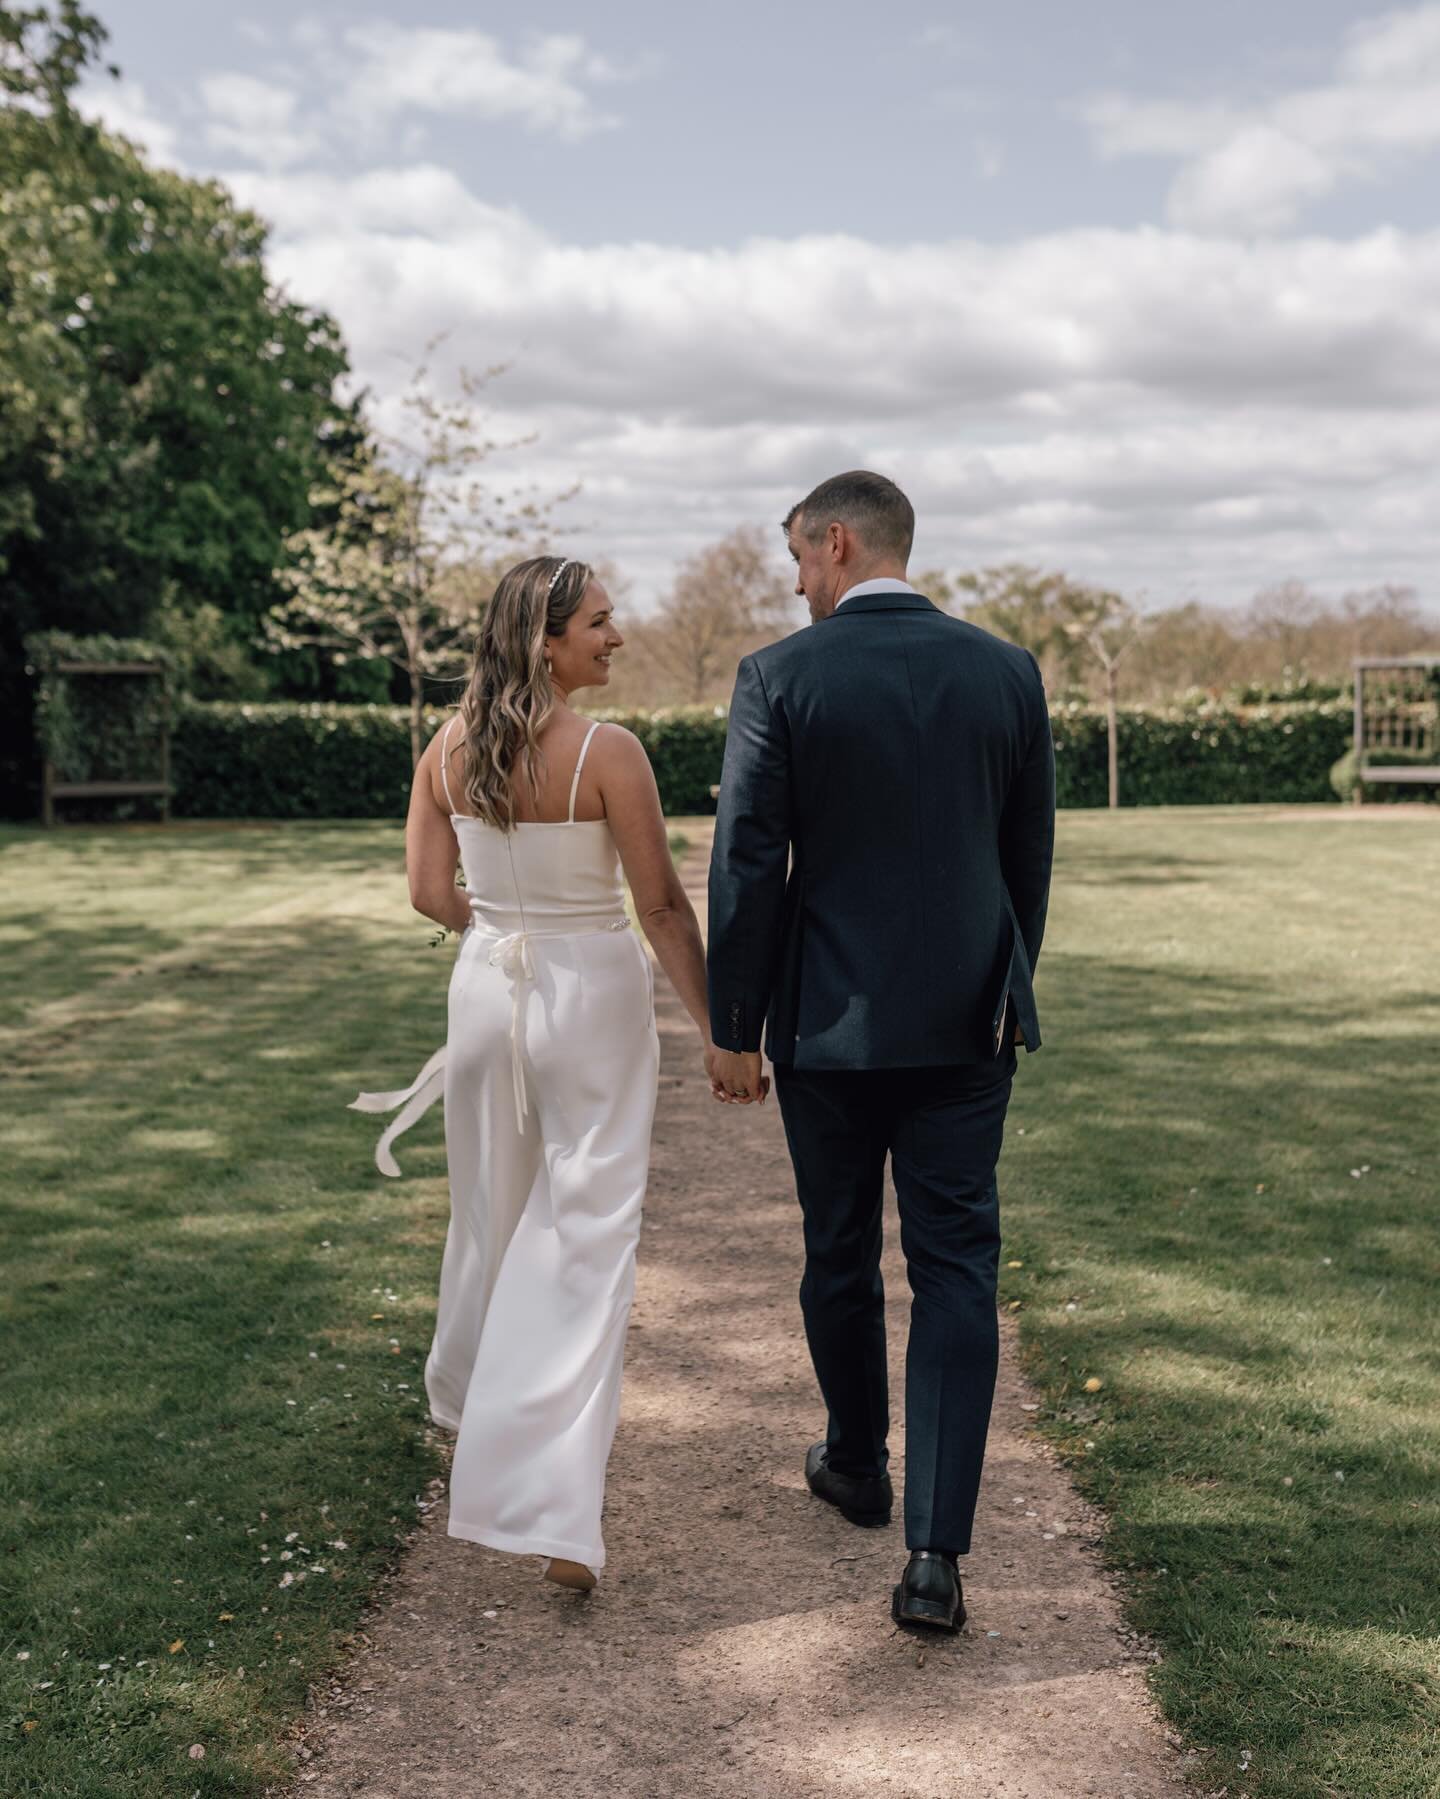 Freya &amp; Nick 🤍

The sun came out for Freya &amp; Nick&rsquo;s celebration yesterday ✨

I think my favourite part of this wedding was the two mothers speeches, listening to them speak so highly of their children was so special. 
There wasn&rsquo;